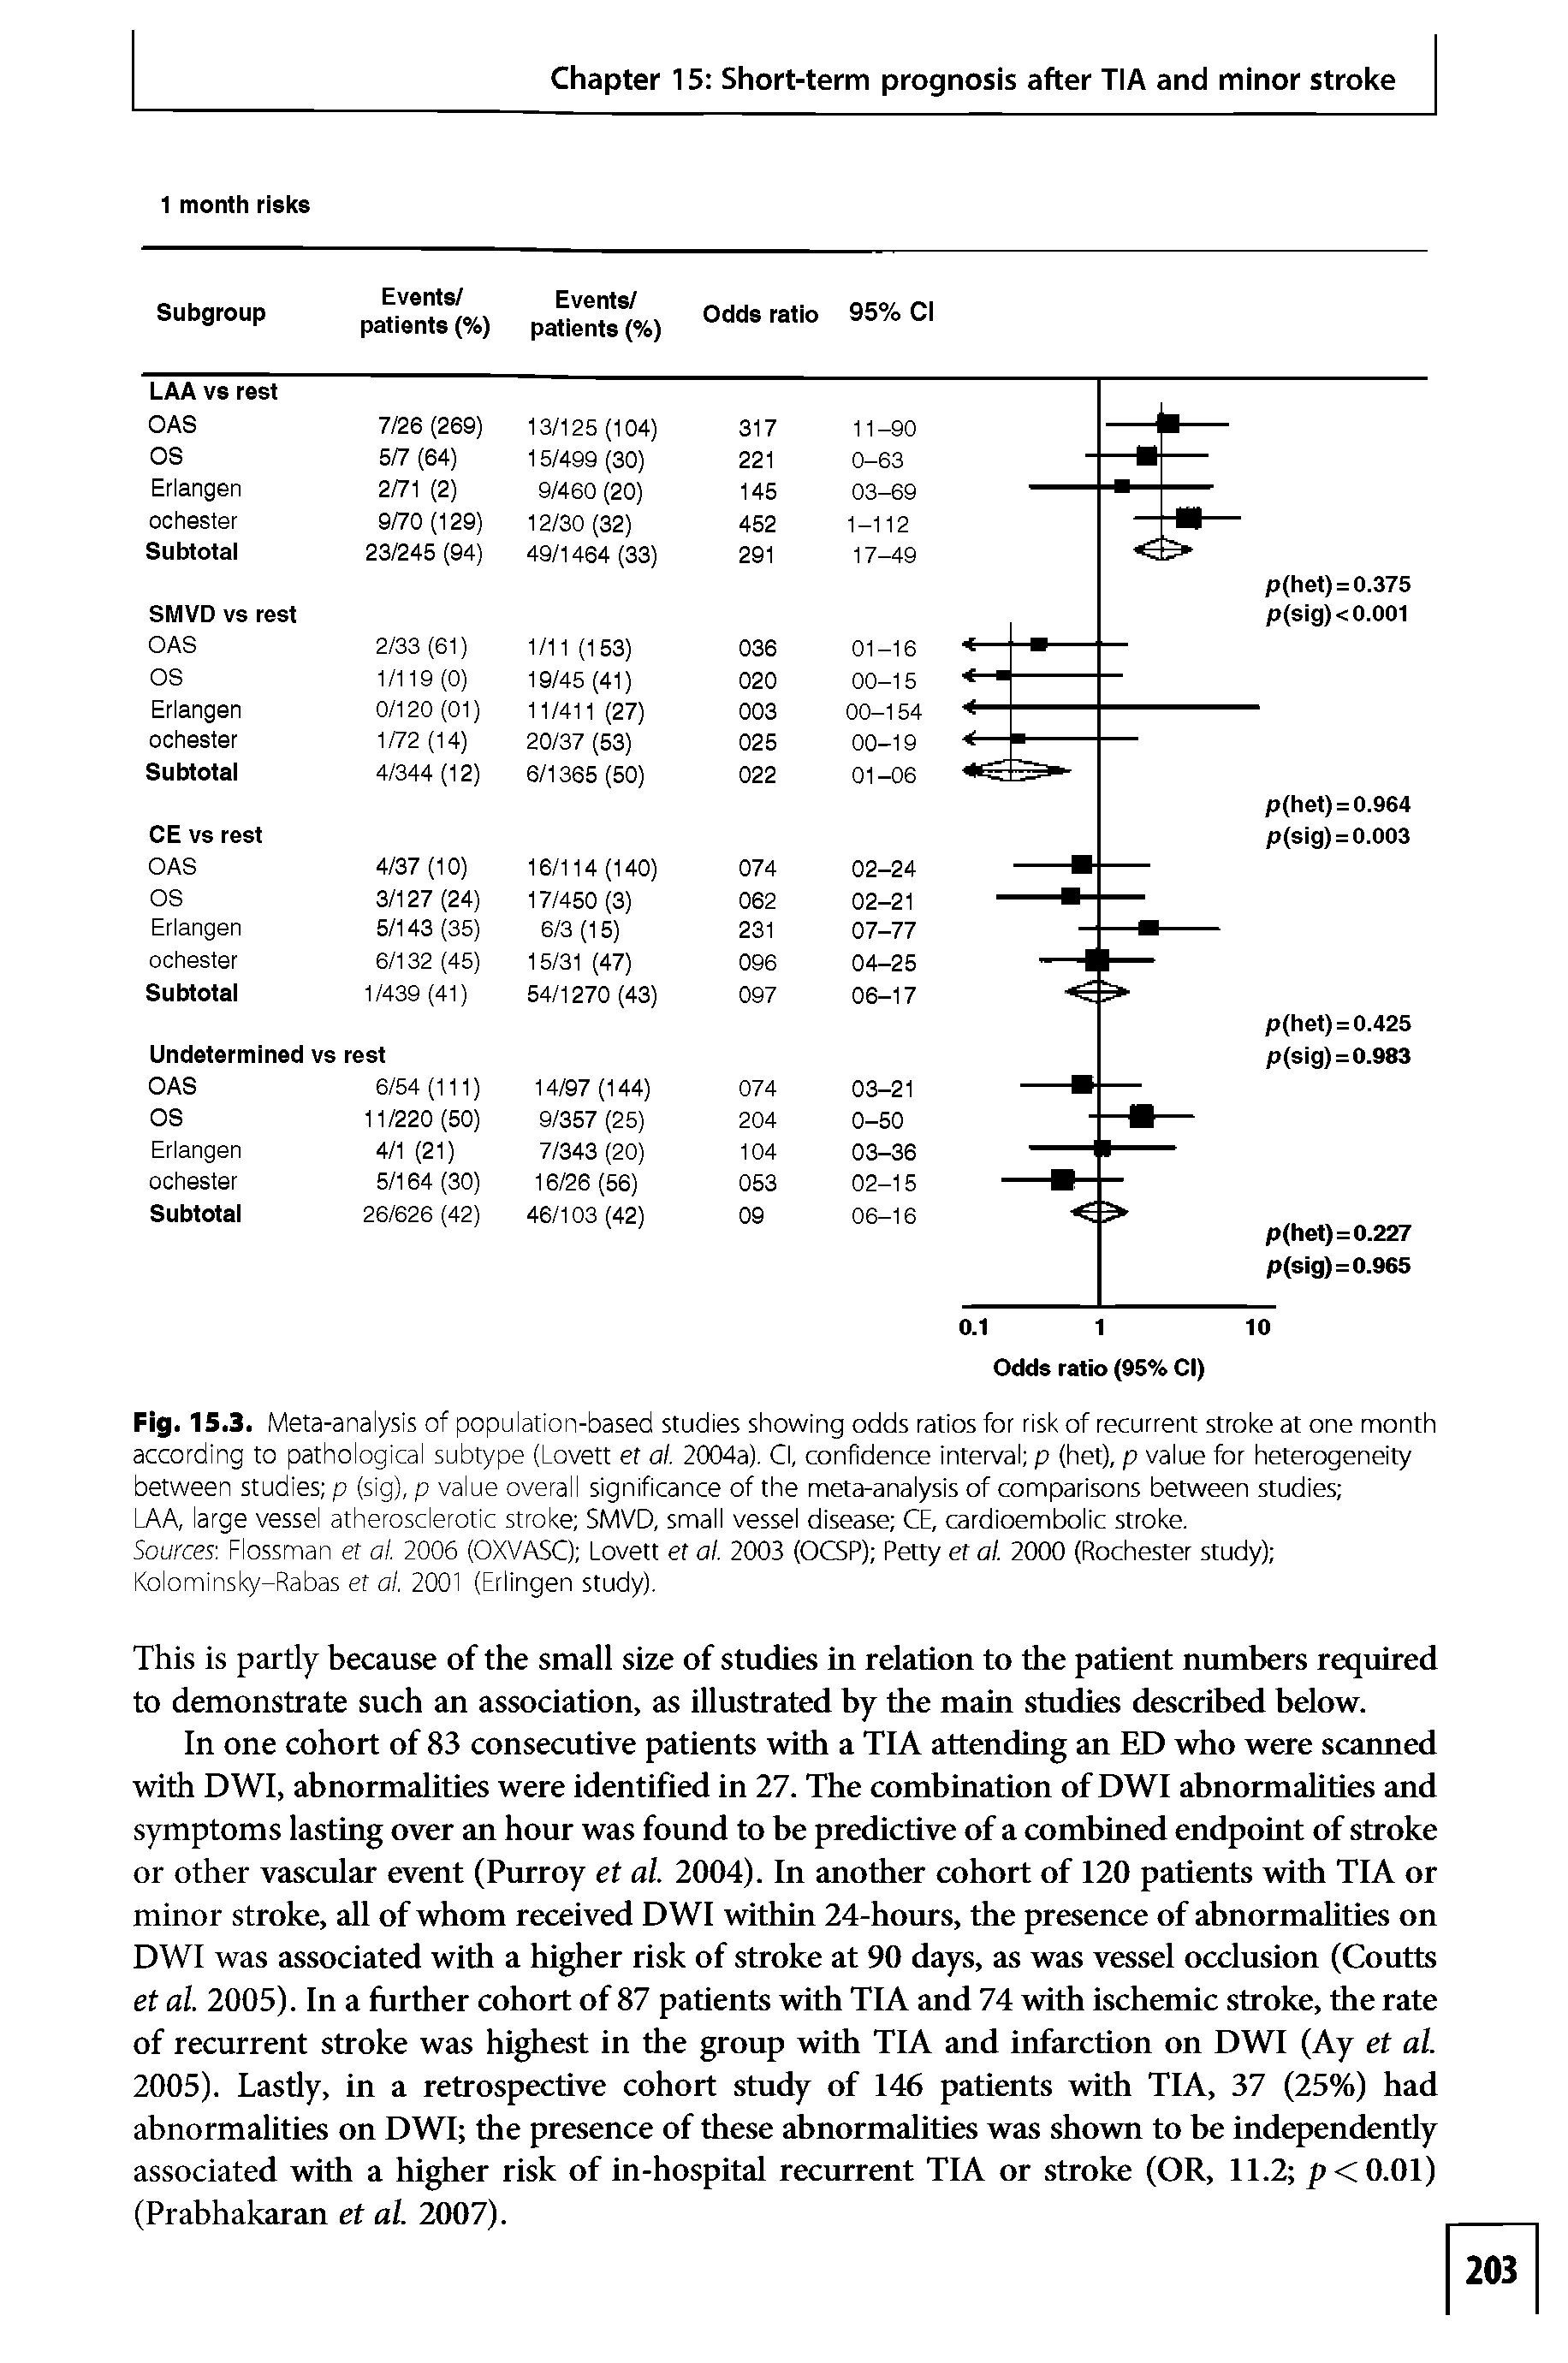 Fig. 15.3. Meta-analysis of population-based studies showing odds ratios for risk of recurrent stroke at one month according to pathological subtype (Lovett et al. 2004a). Cl, confidence interval p (het), p value for heterogeneity between studies p (sig), p value overall significance of the meta-analysis of comparisons between studies ...